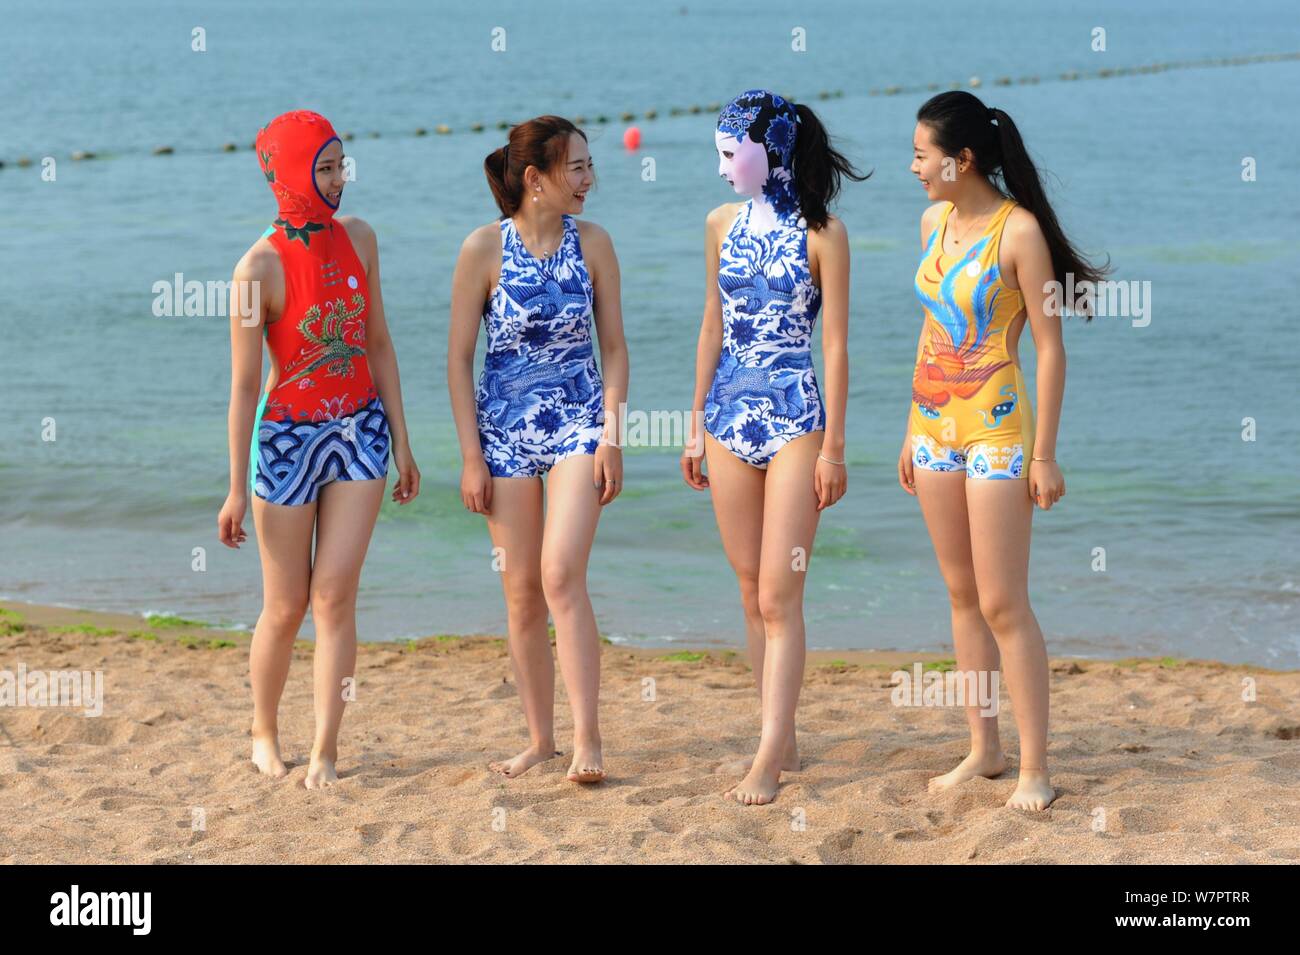 https://c8.alamy.com/comp/W7PTRR/a-model-second-right-wearing-a-facekini-swimsuit-featuring-blue-and-white-porcelain-and-embroidery-is-pictured-at-a-beach-resort-in-qingdao-city-ea-W7PTRR.jpg